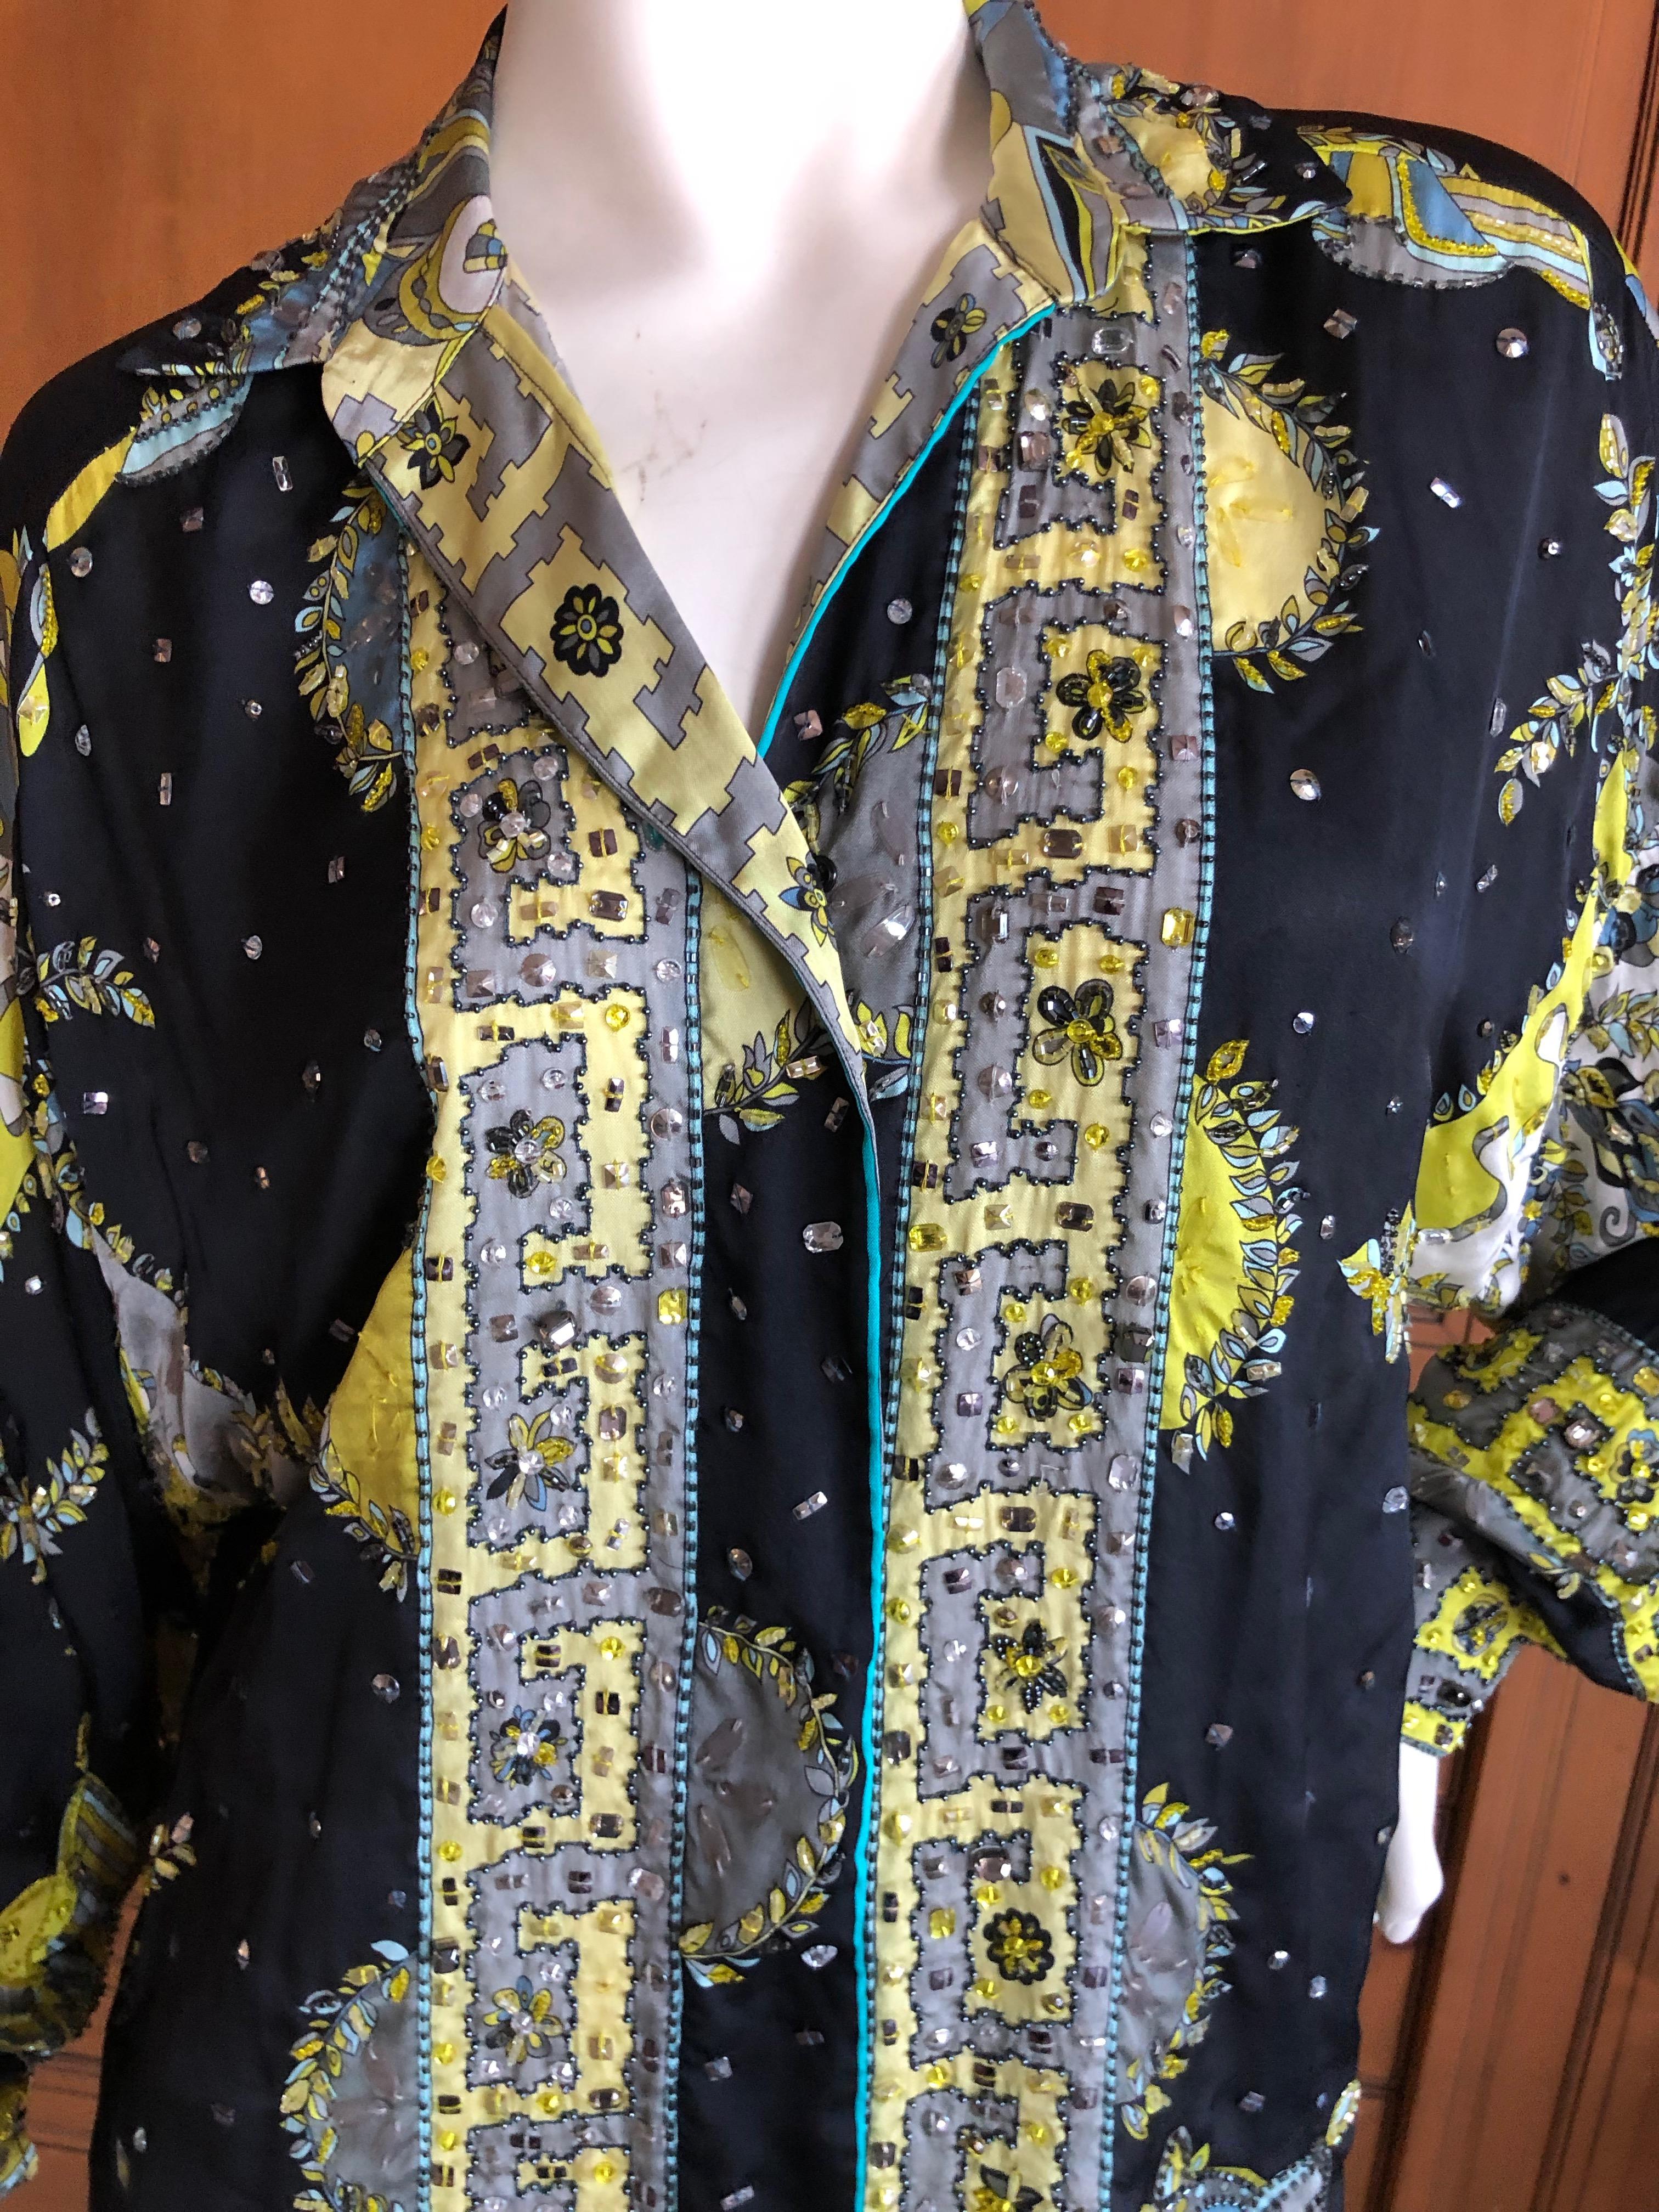 Emilio Pucci Remarkable Silk Bead and Crystal Embellished Top
WOW 
Rare to see an embellished Pucci top, this is unreal.
Will fit a man too. I am a size 42 man and it fit snugly
Size 
Bust / Chest  46